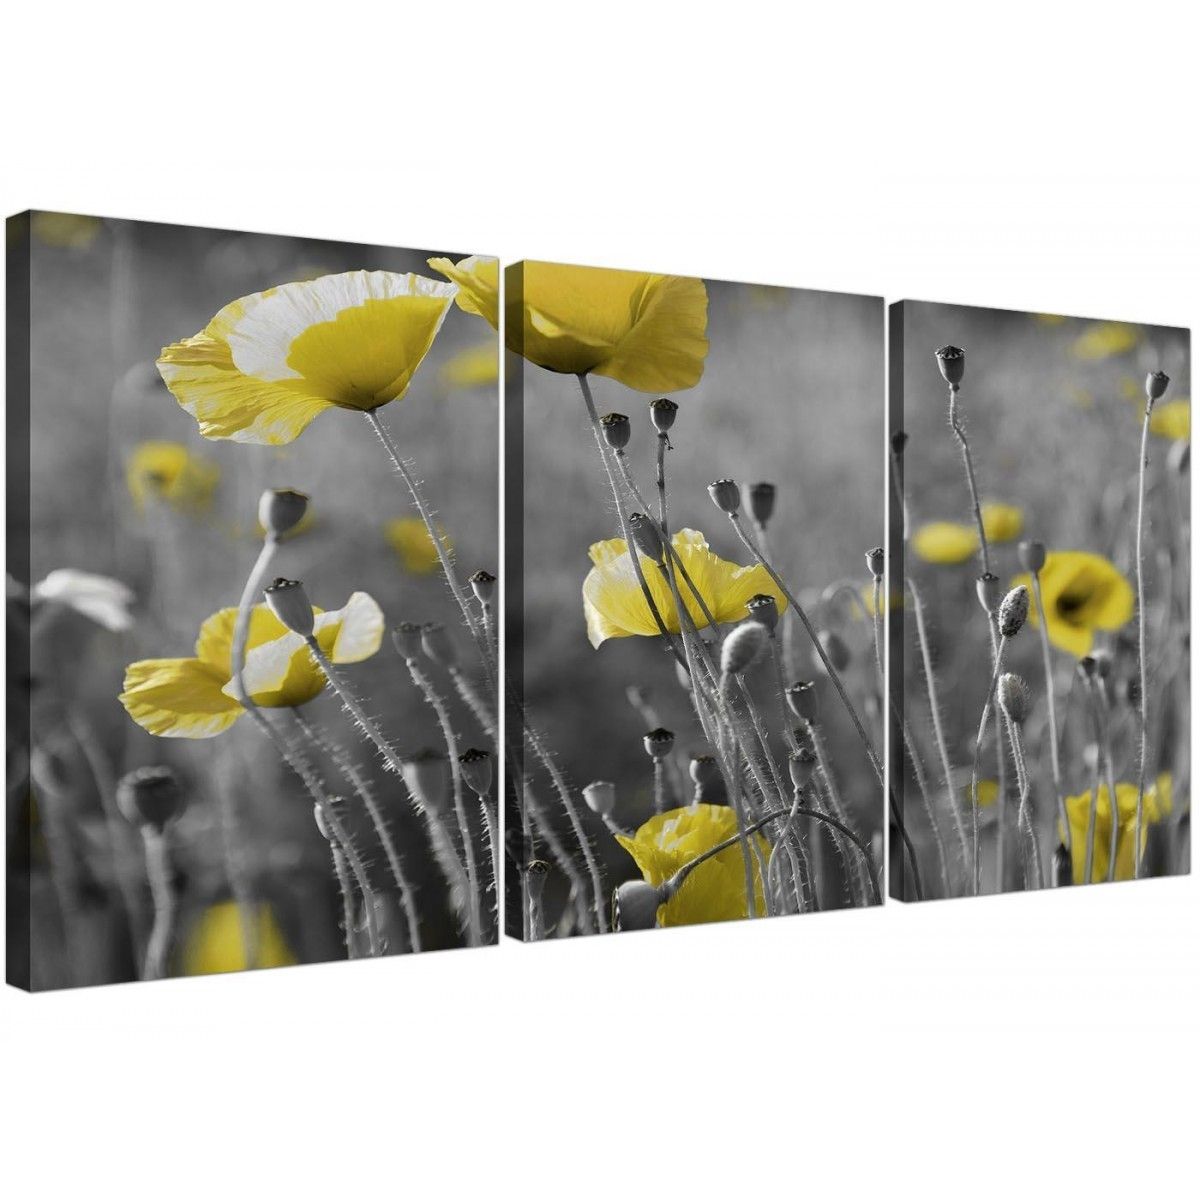 Black And White Canvas With Grey And Yellow Poppies Wall Art Prints In Yellow And Grey Wall Art (View 4 of 20)